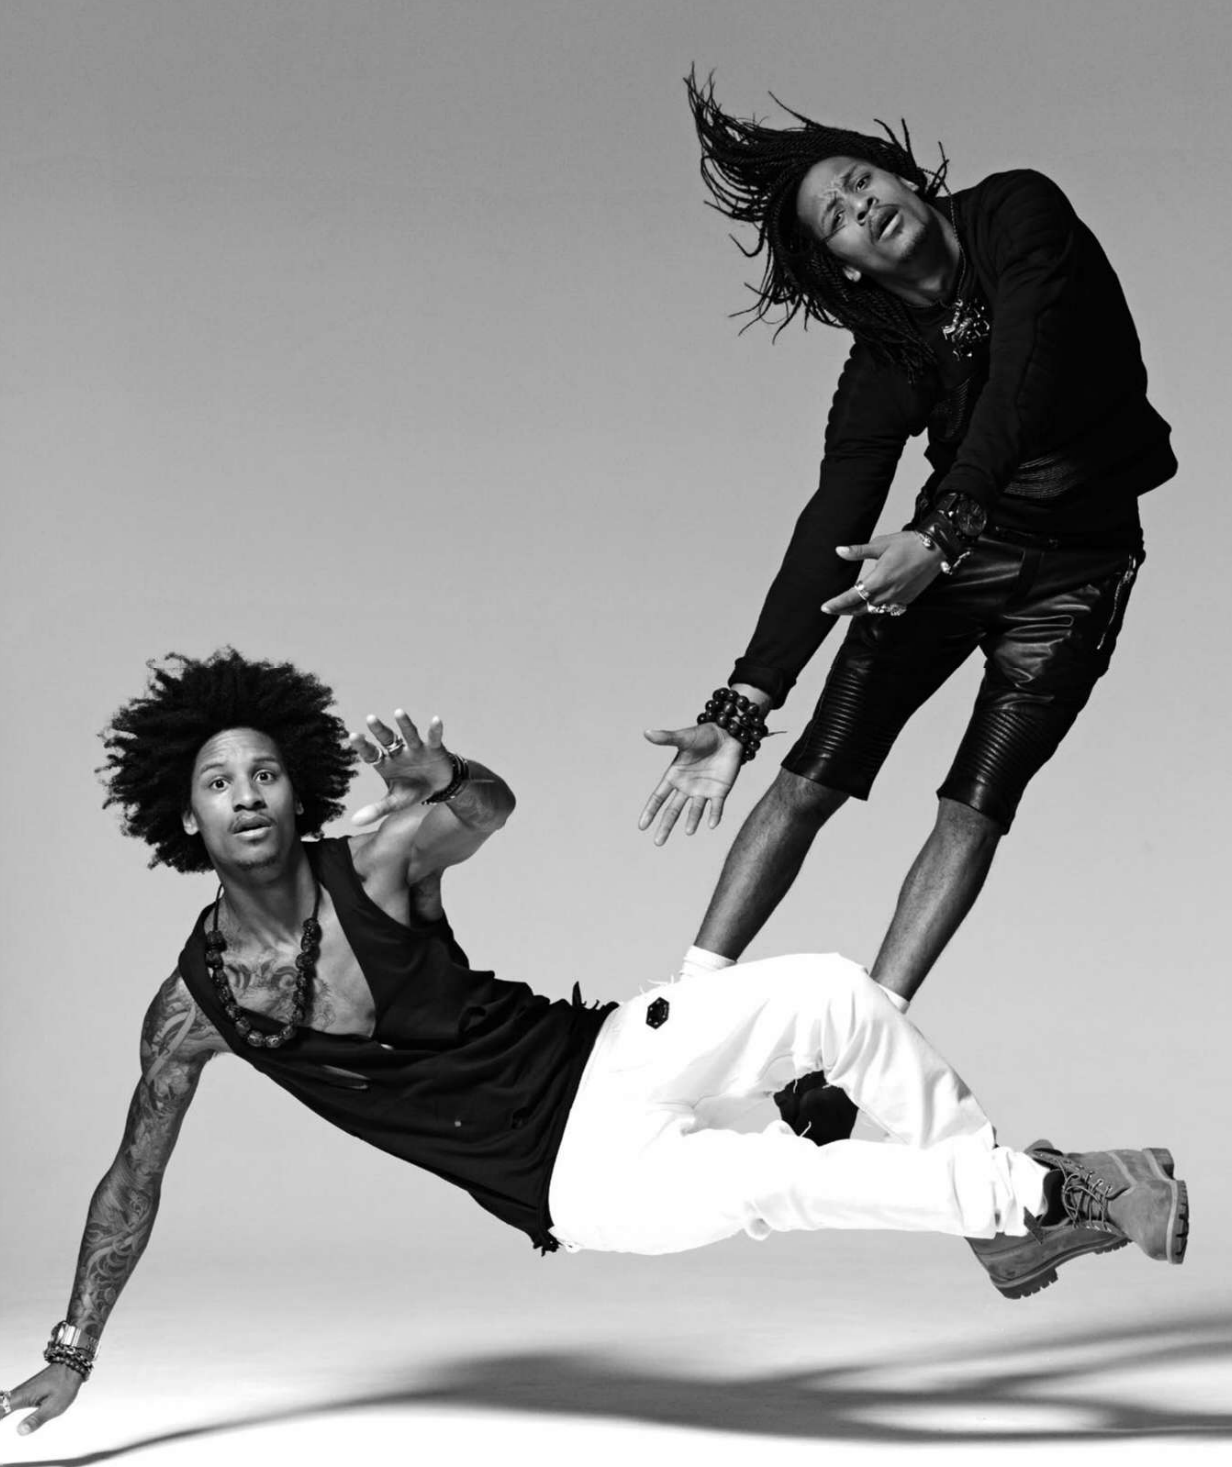 a-girl-walks-in-paris-at-night: Les Twins photographed by Michael Avedon wearing